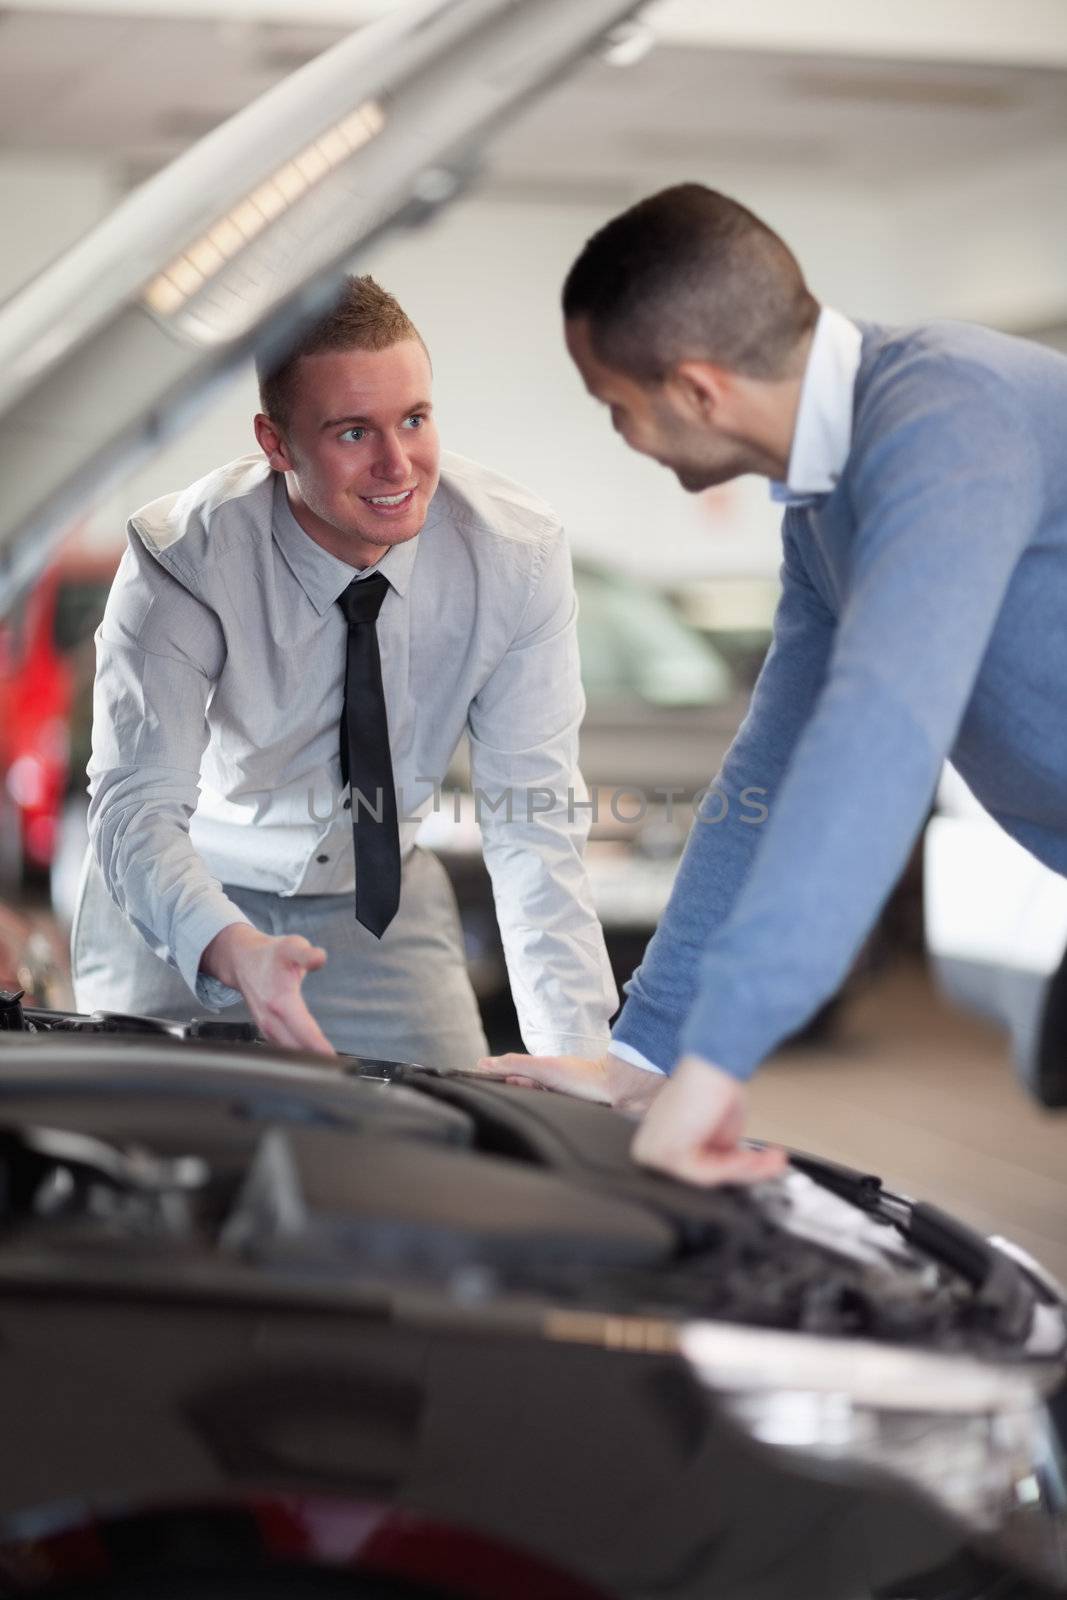 Two men looking at a car engine by Wavebreakmedia